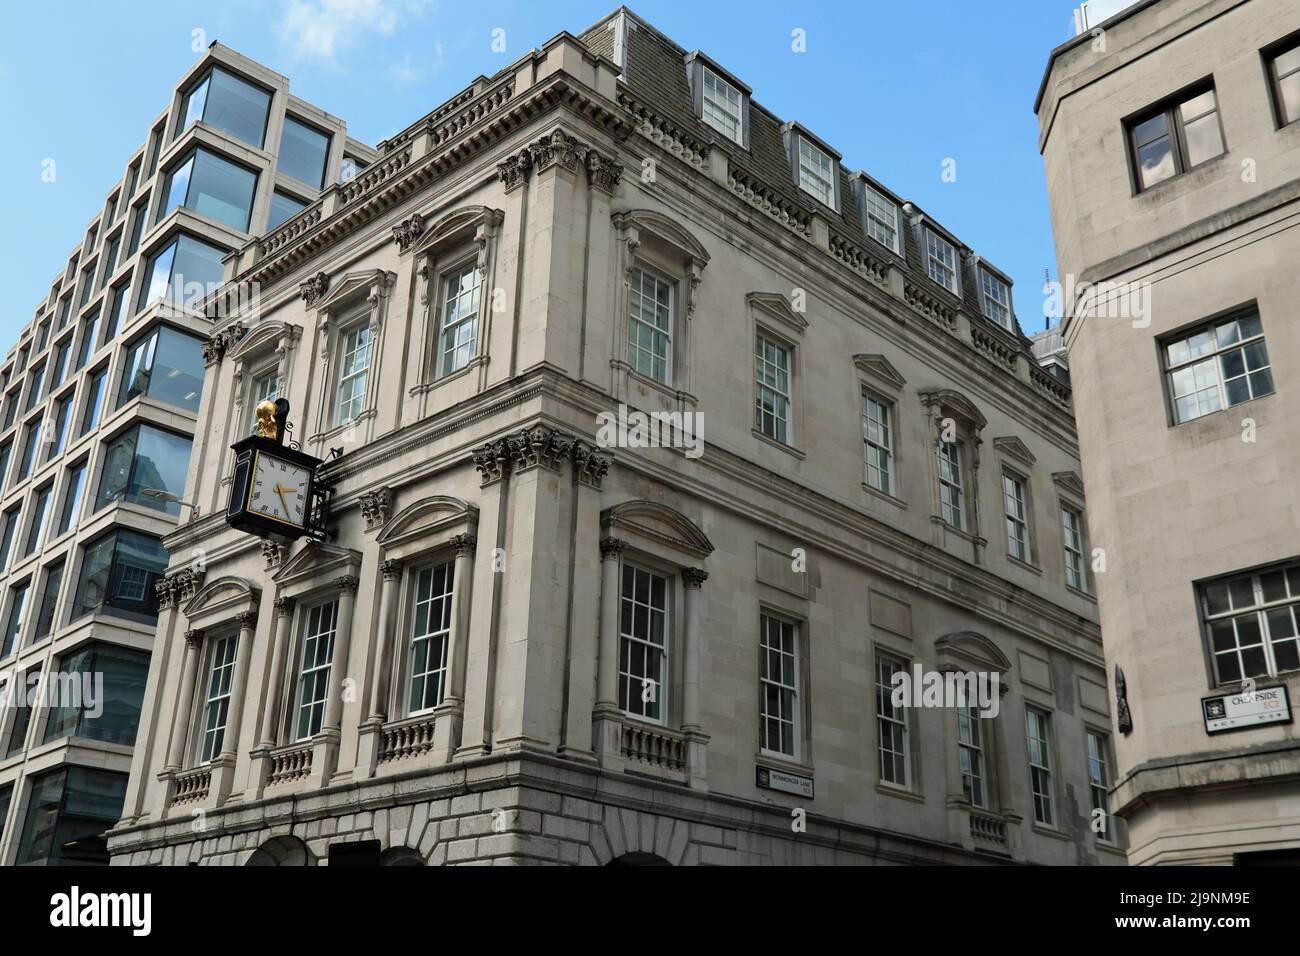 Atlas House at Cheapside in the City of London Stock Photo